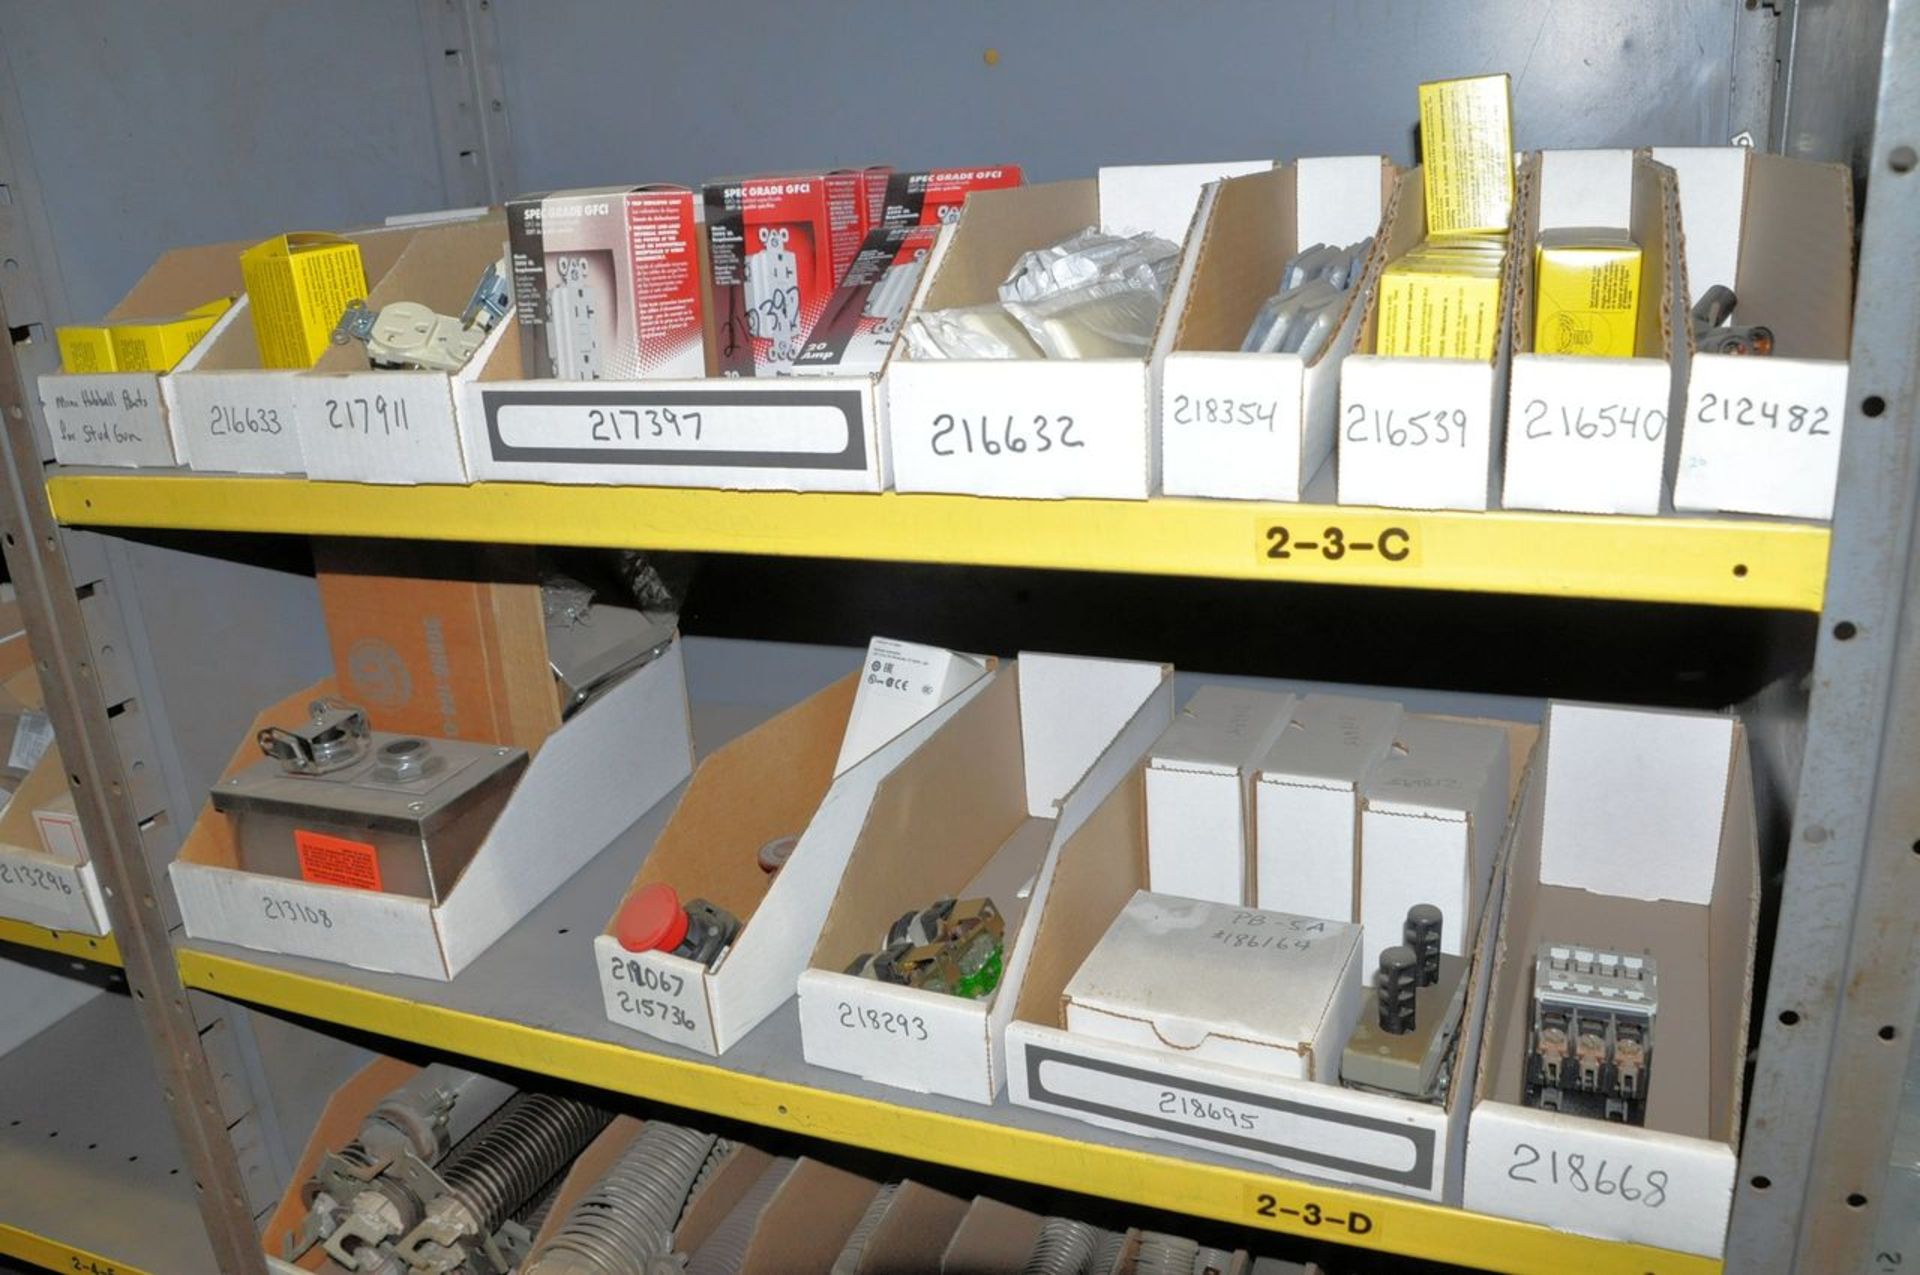 Lot - Pipe Fittings, Wire Spools, Electrical Hardware, Fluorescent and Incandescent Bulbs, etc. - Image 22 of 29